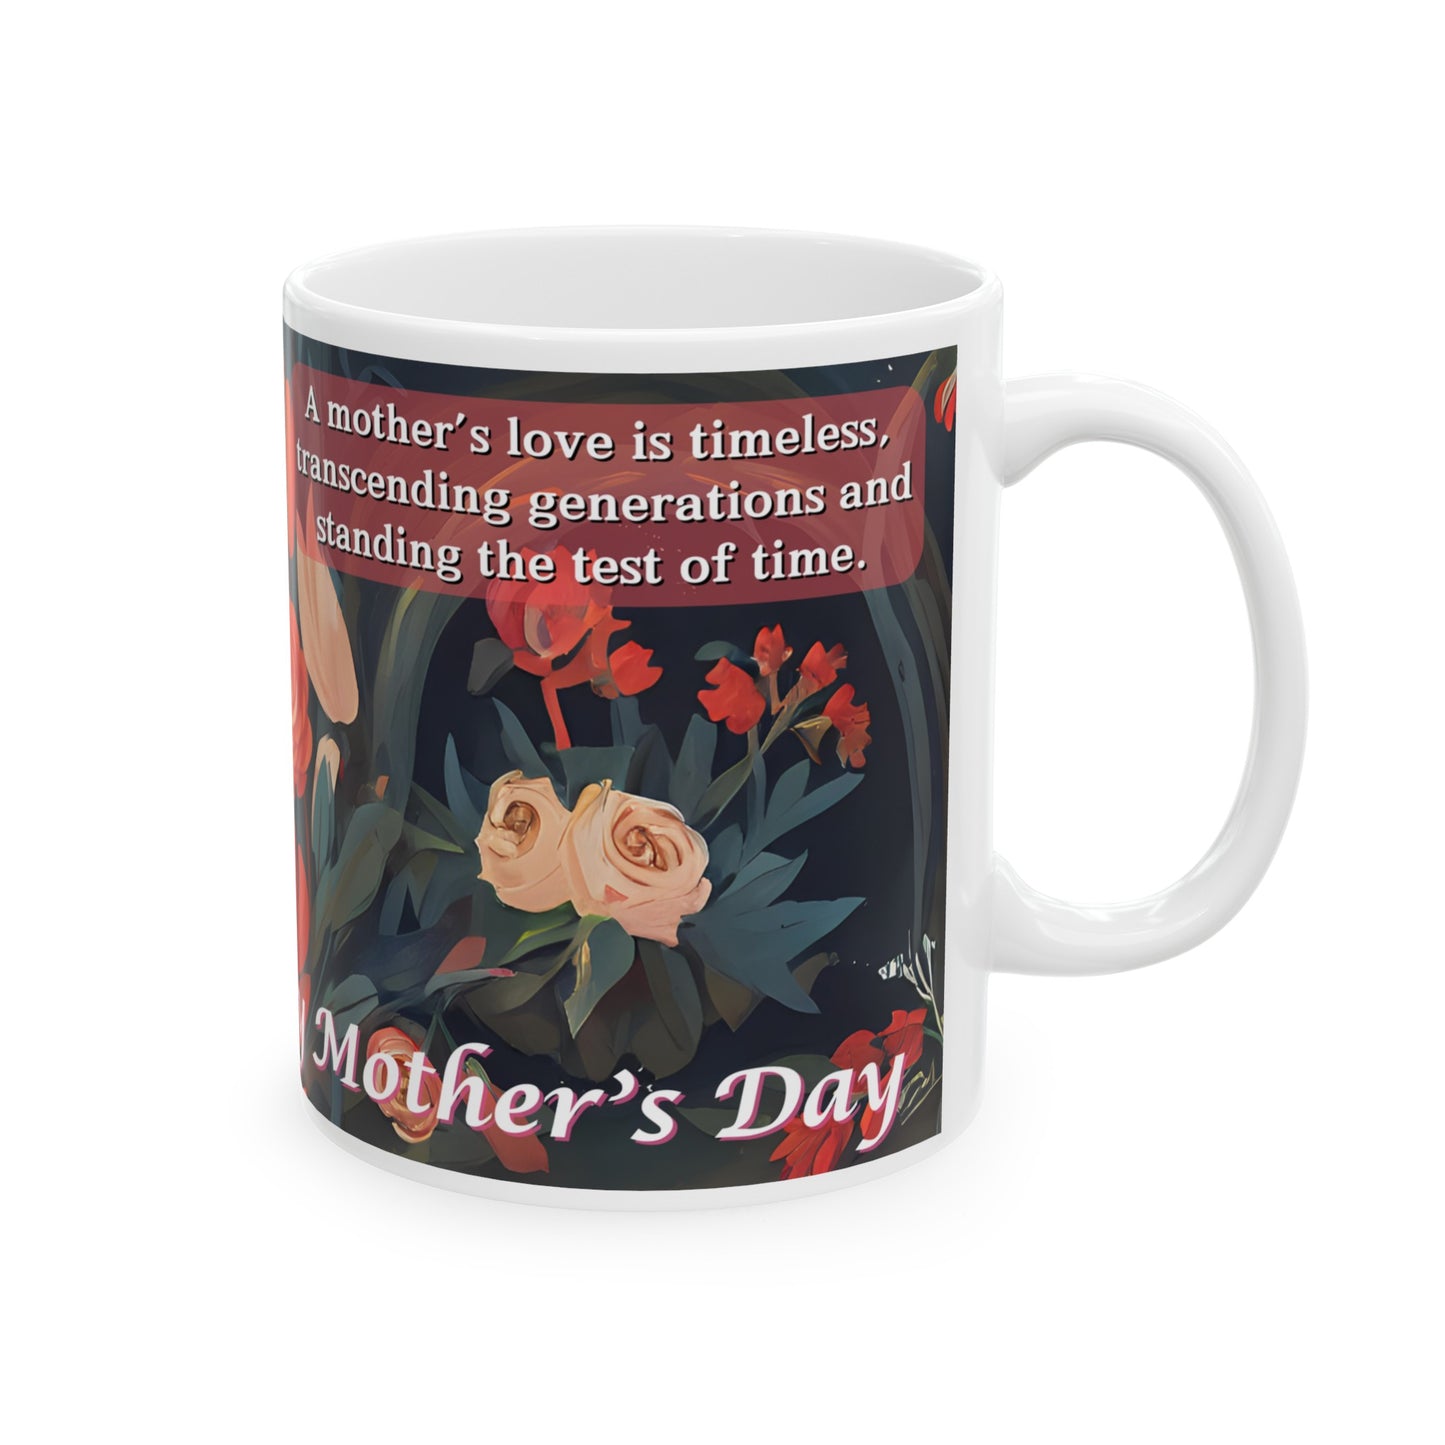 A Mother's Love is Timeless - Mother's Day - 11oz mug